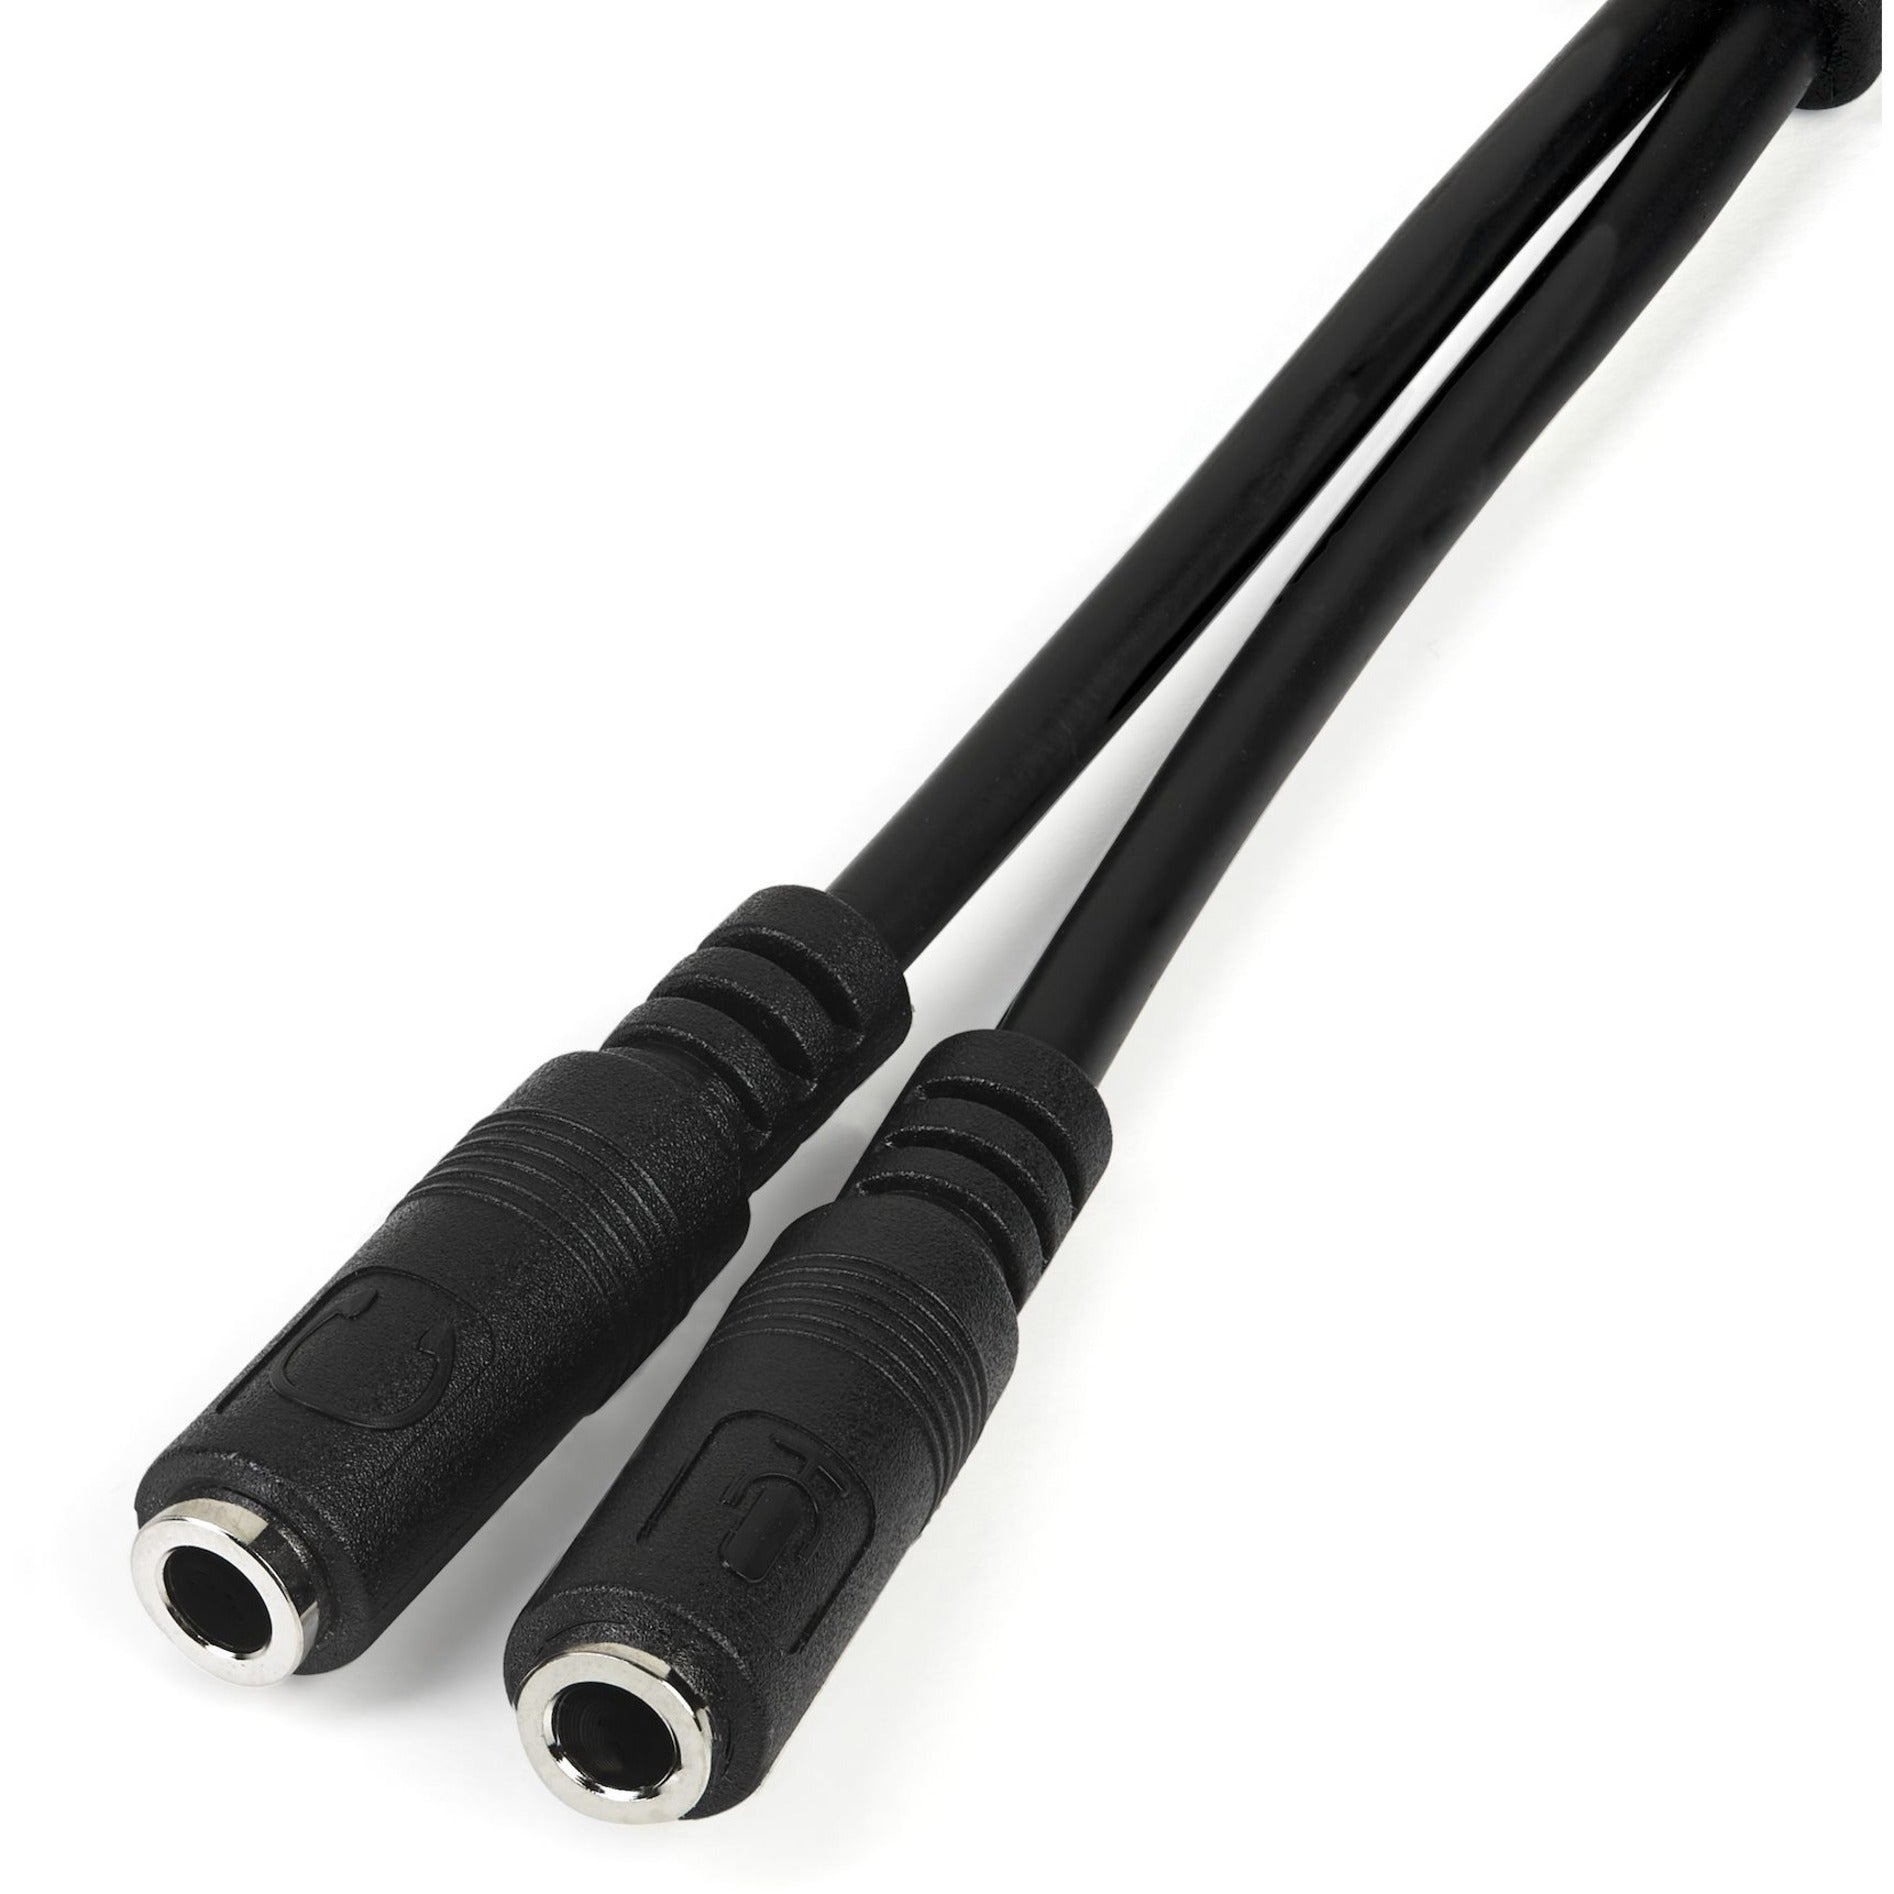 StarTech.com MUYHSMFF Mini-phone Audio Cable, 3.5mm 4 Pin to 2x 3 Pin Headset Adapter - M/F